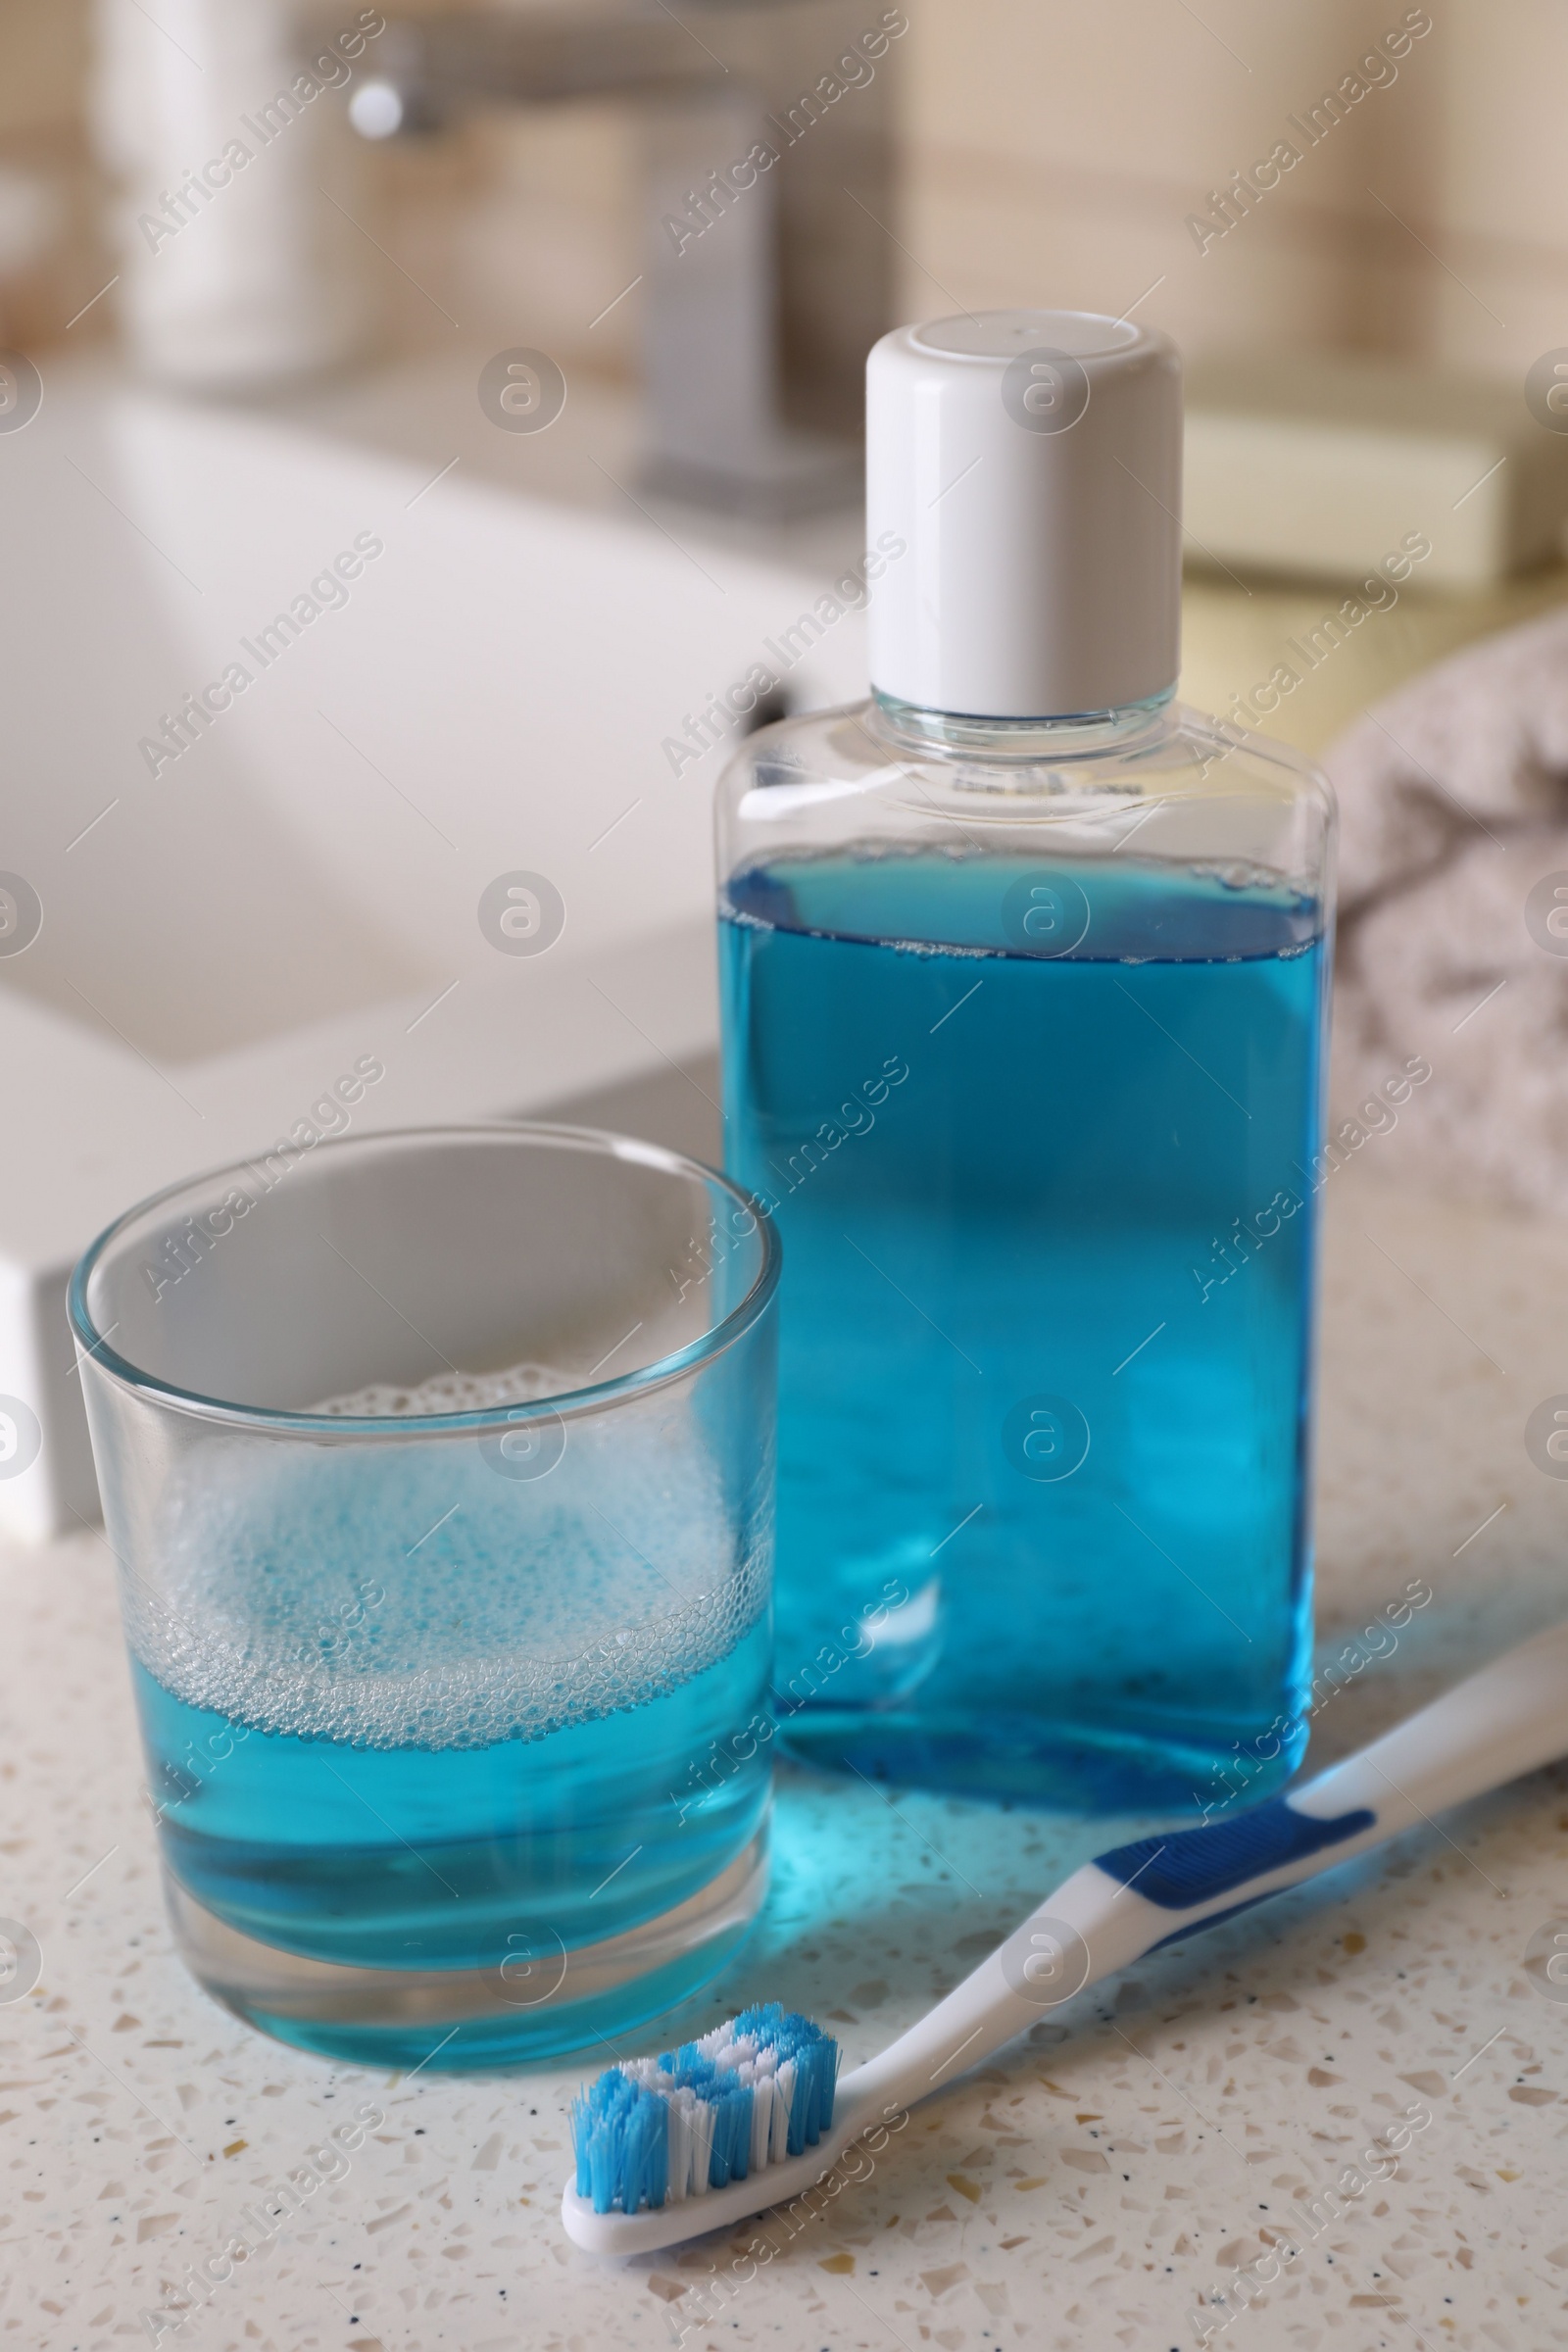 Photo of Fresh mouthwash in bottle, glass and dental floss on countertop, closeup